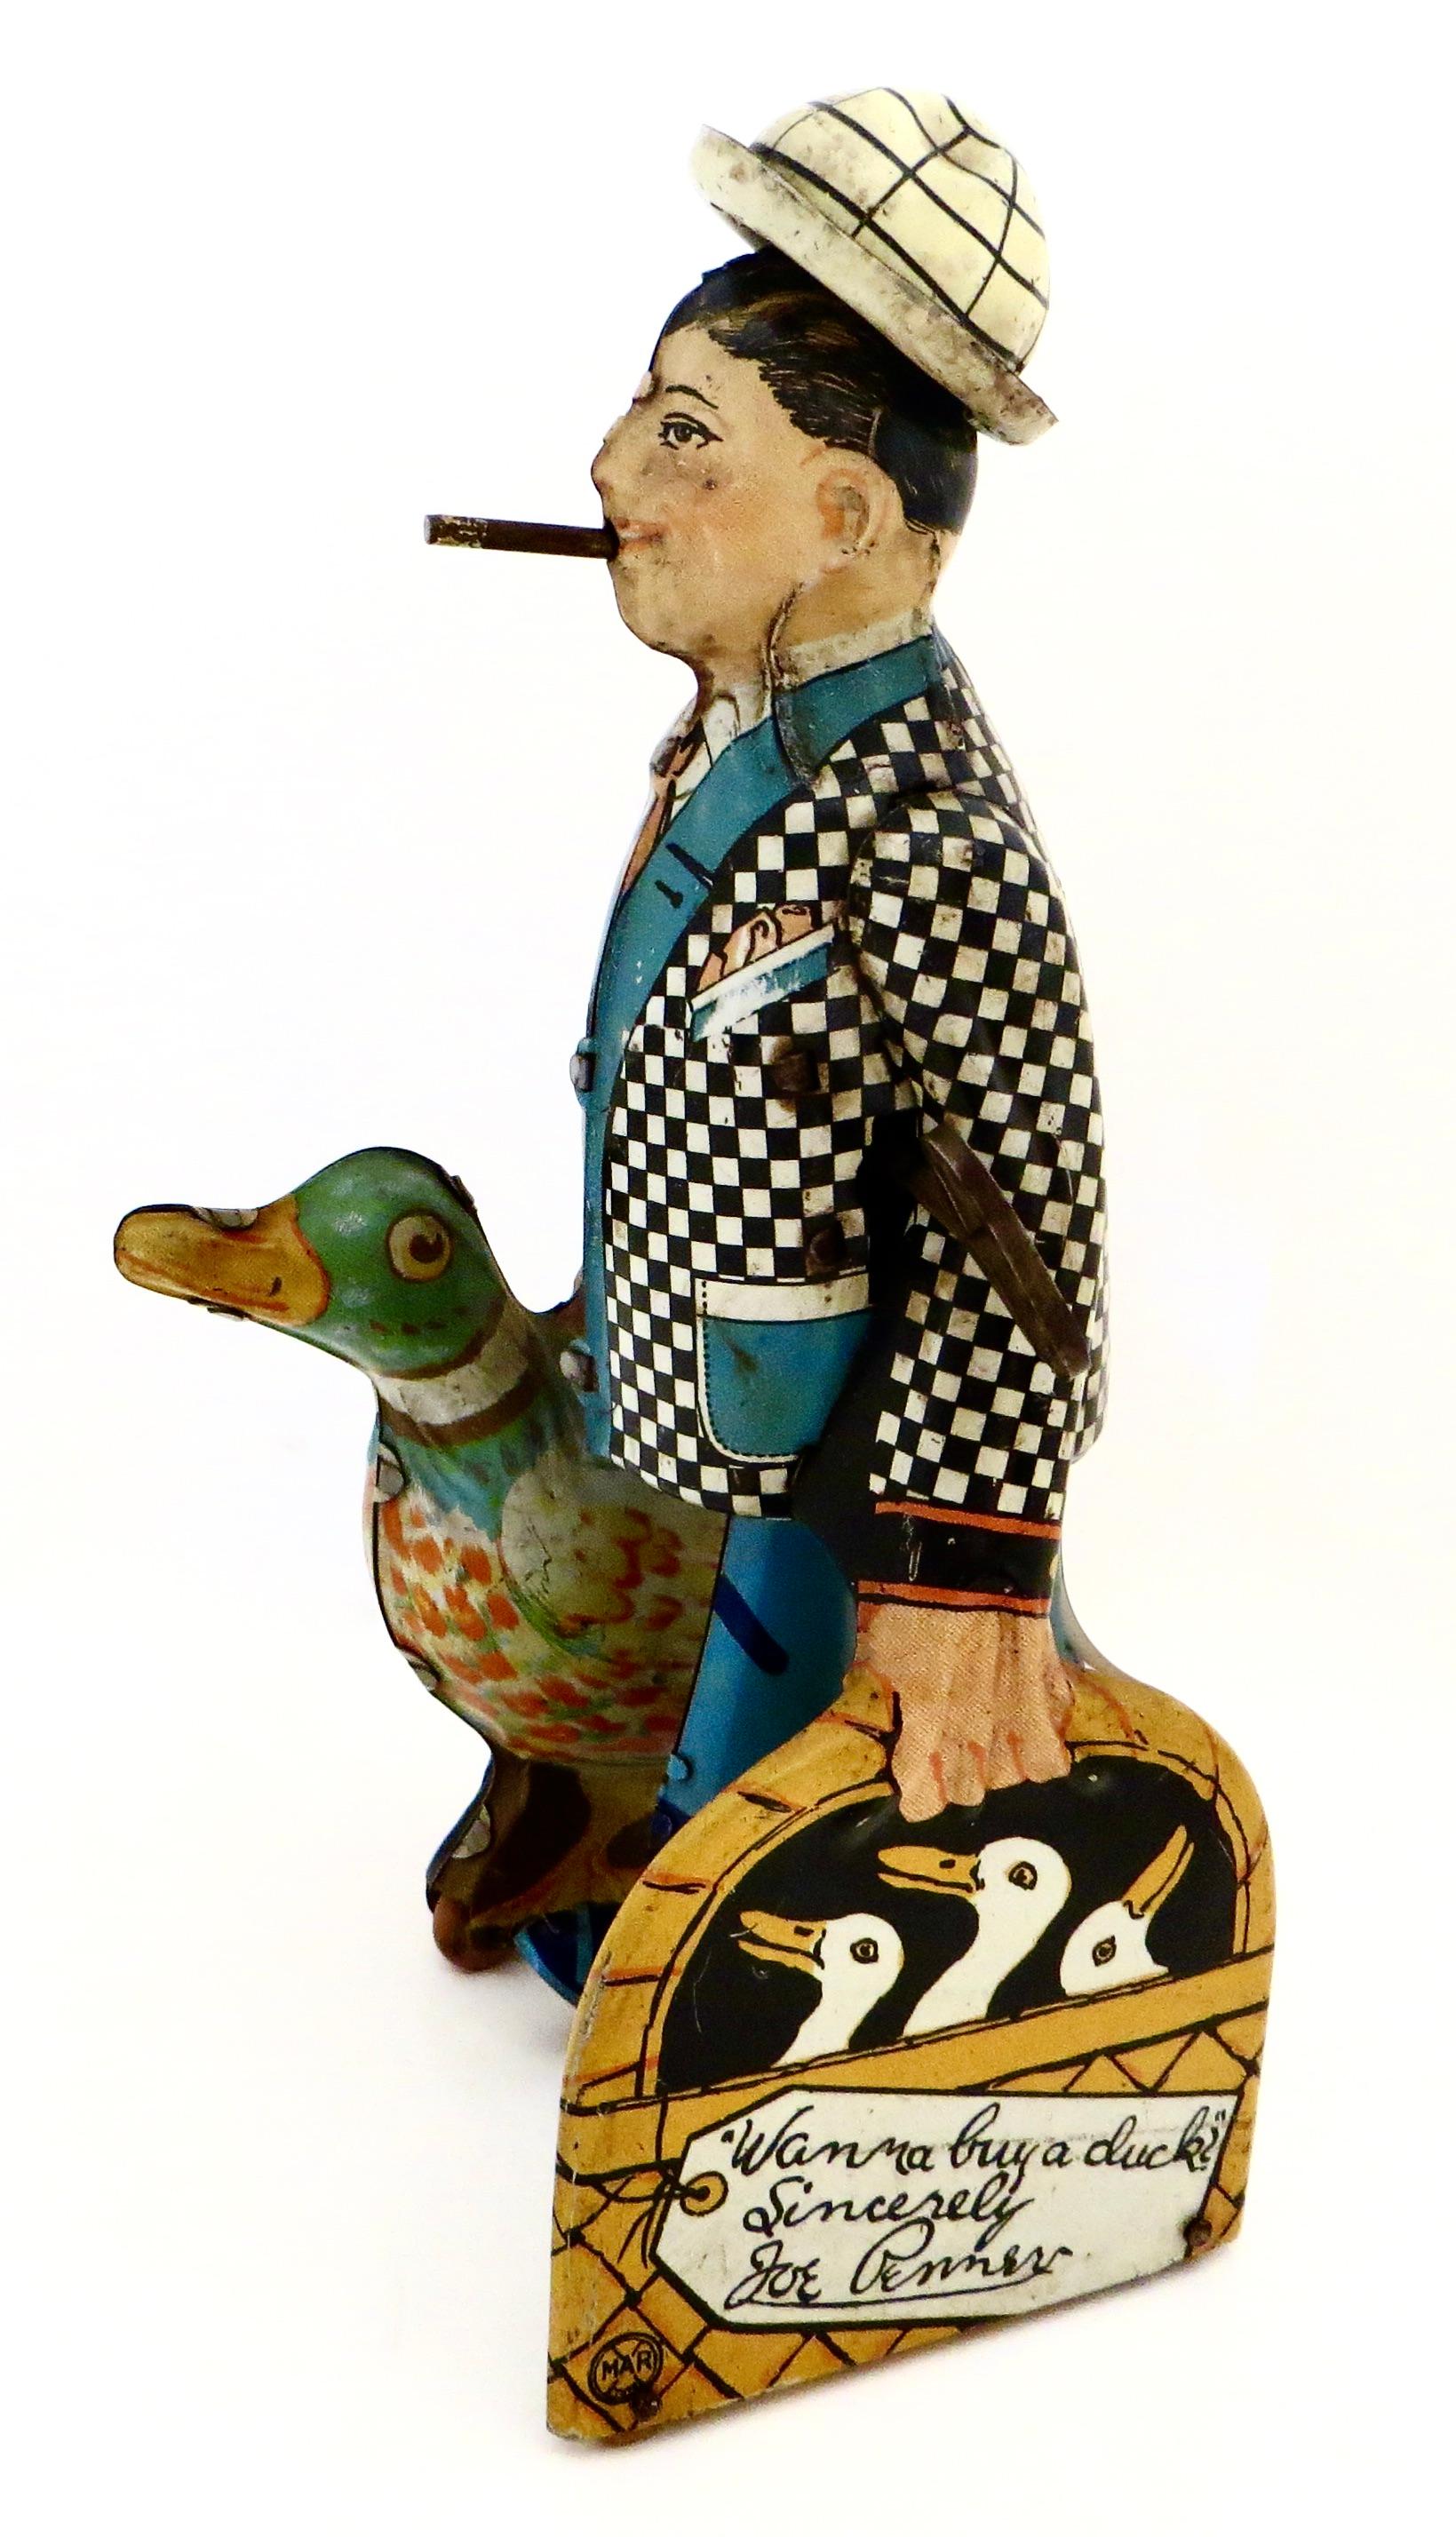 Fabulous American vintage all tin wind-up toy with attached key and clockwork mechanism, whereby upon winding it up, the character (Joe Penner) waddles aimlessly across the floor, hat flying in the air with notorious cigar in motion (see attached